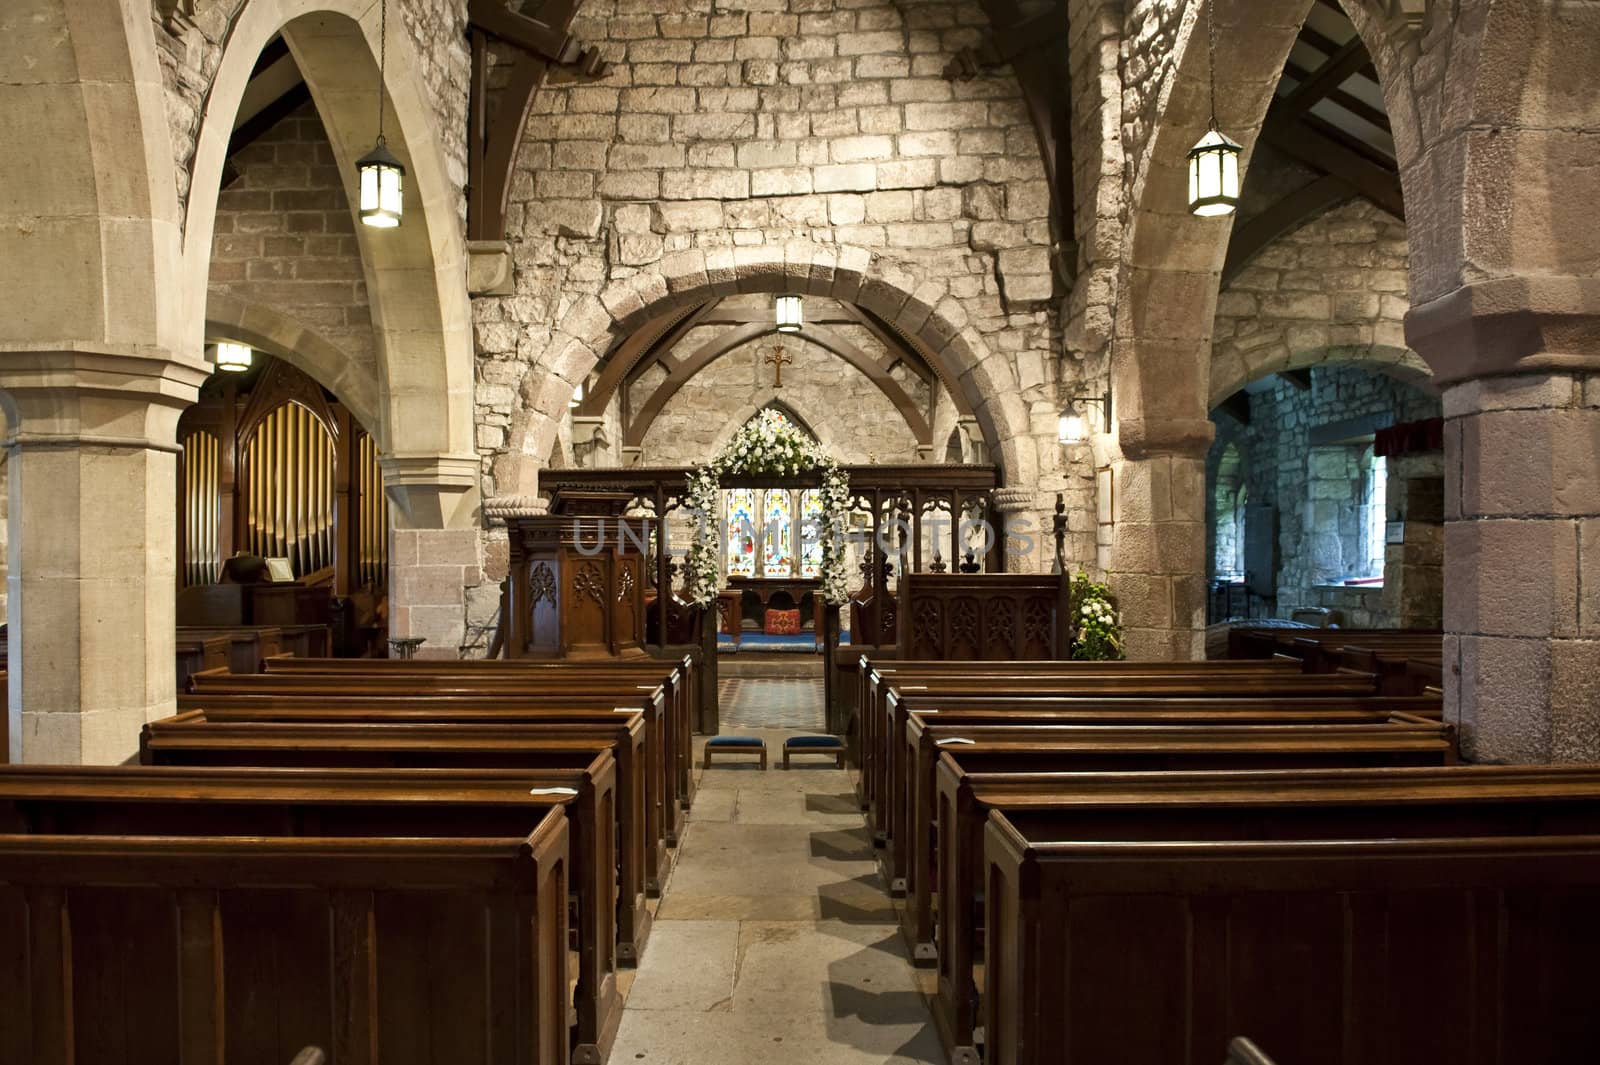 church interior showing centre isle and pews